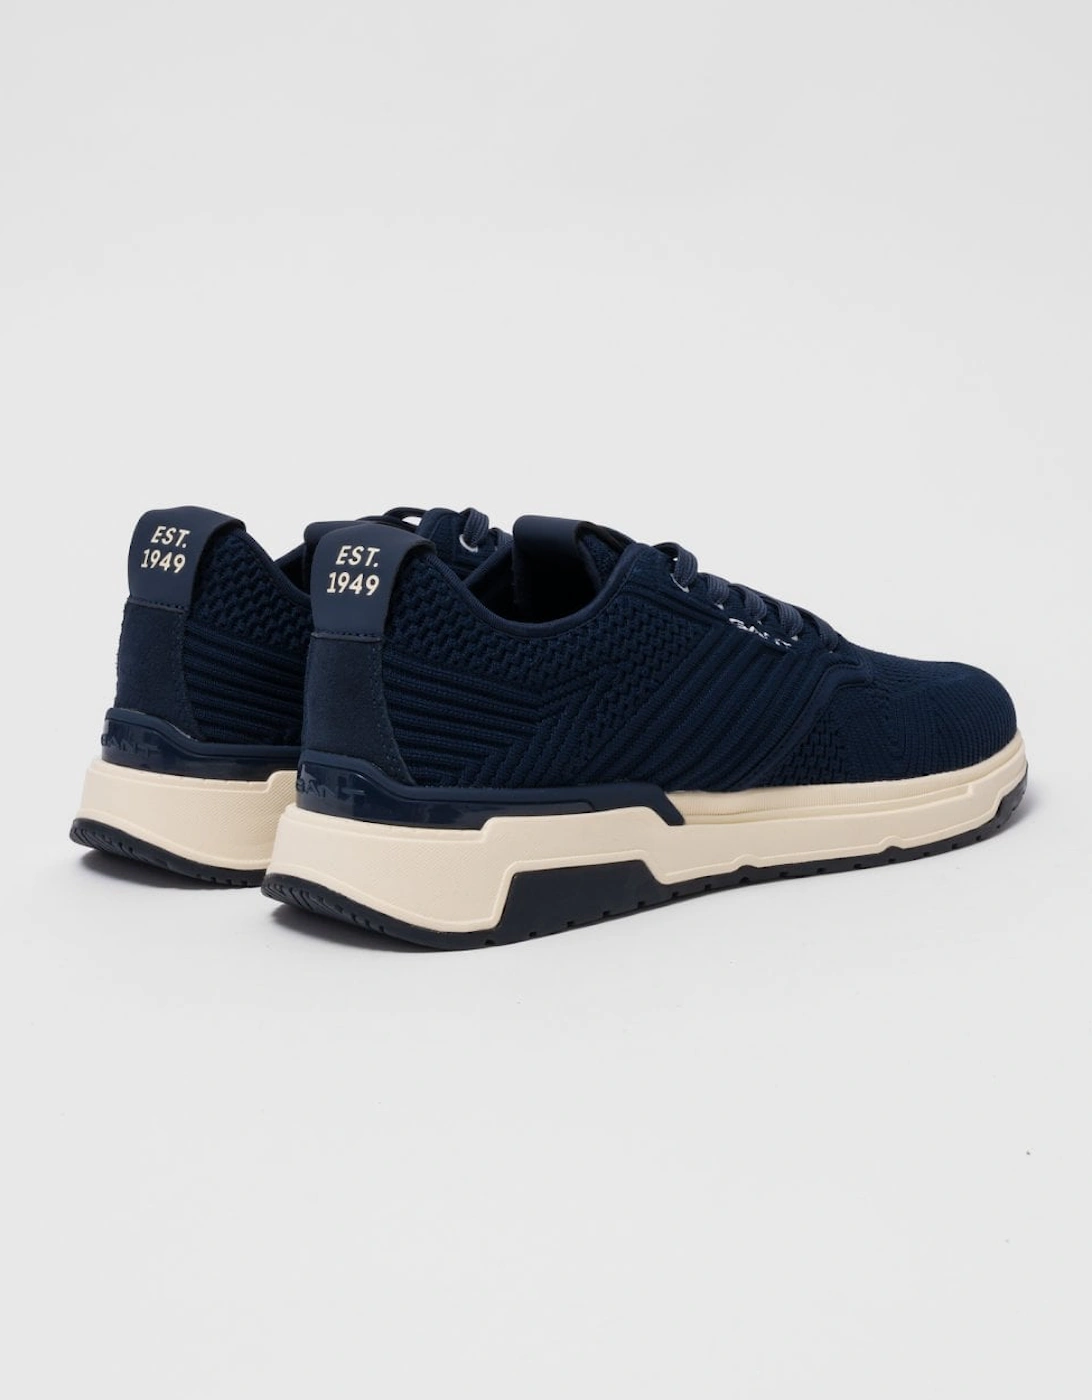 Jeuton Mens Knit Trainers